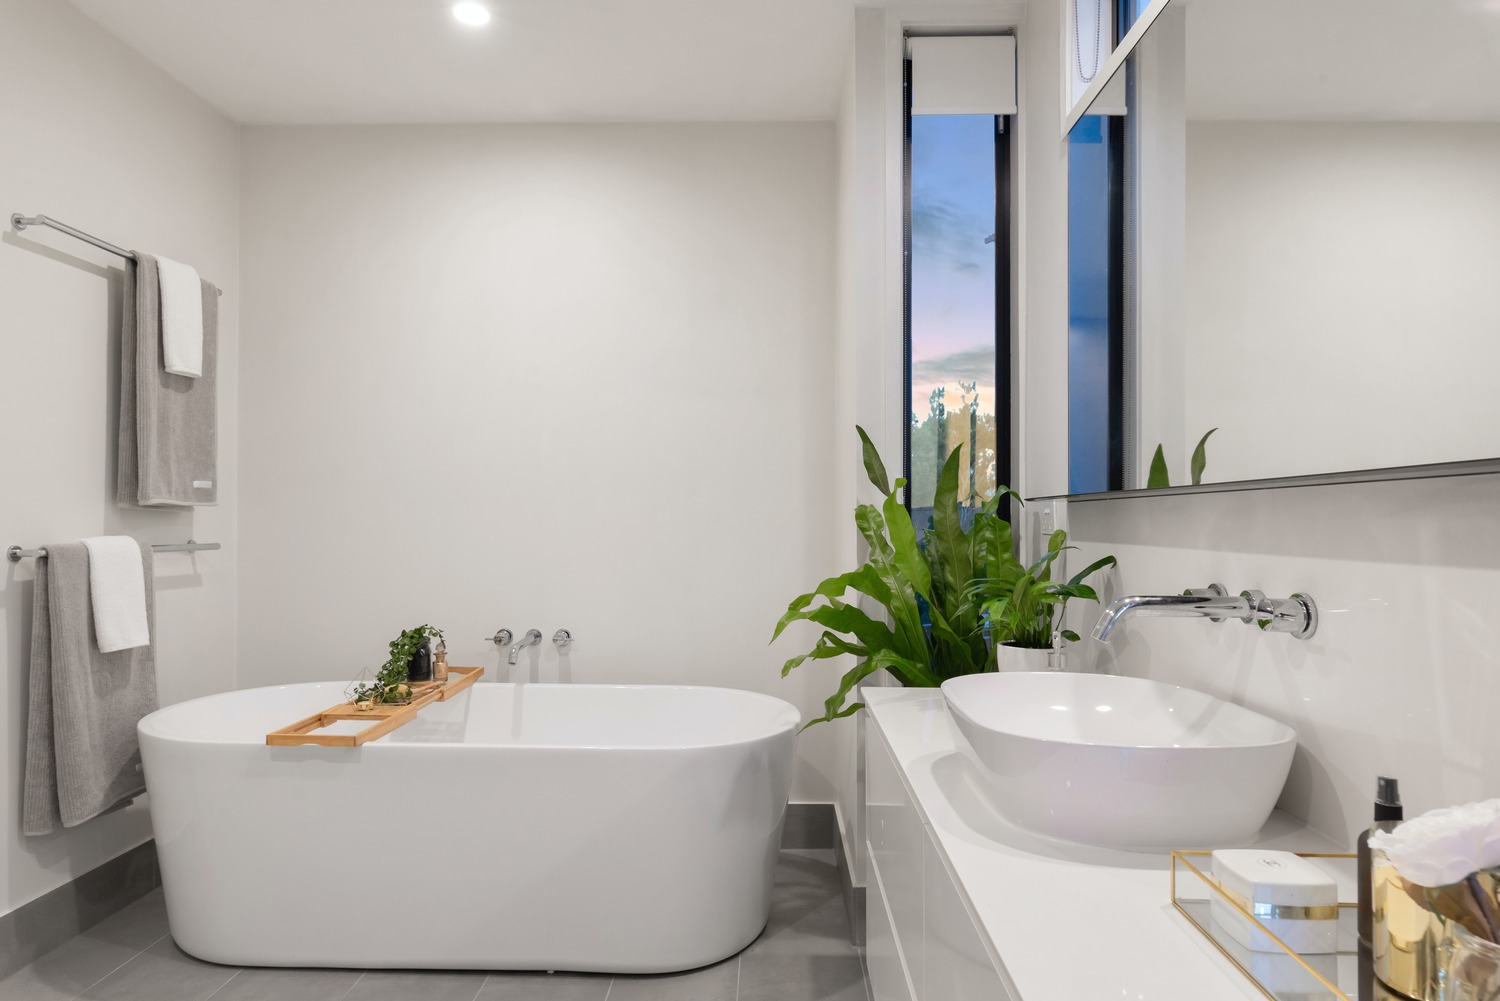 You are currently viewing What is the Cost of a Complete Bathroom Remodel in India?